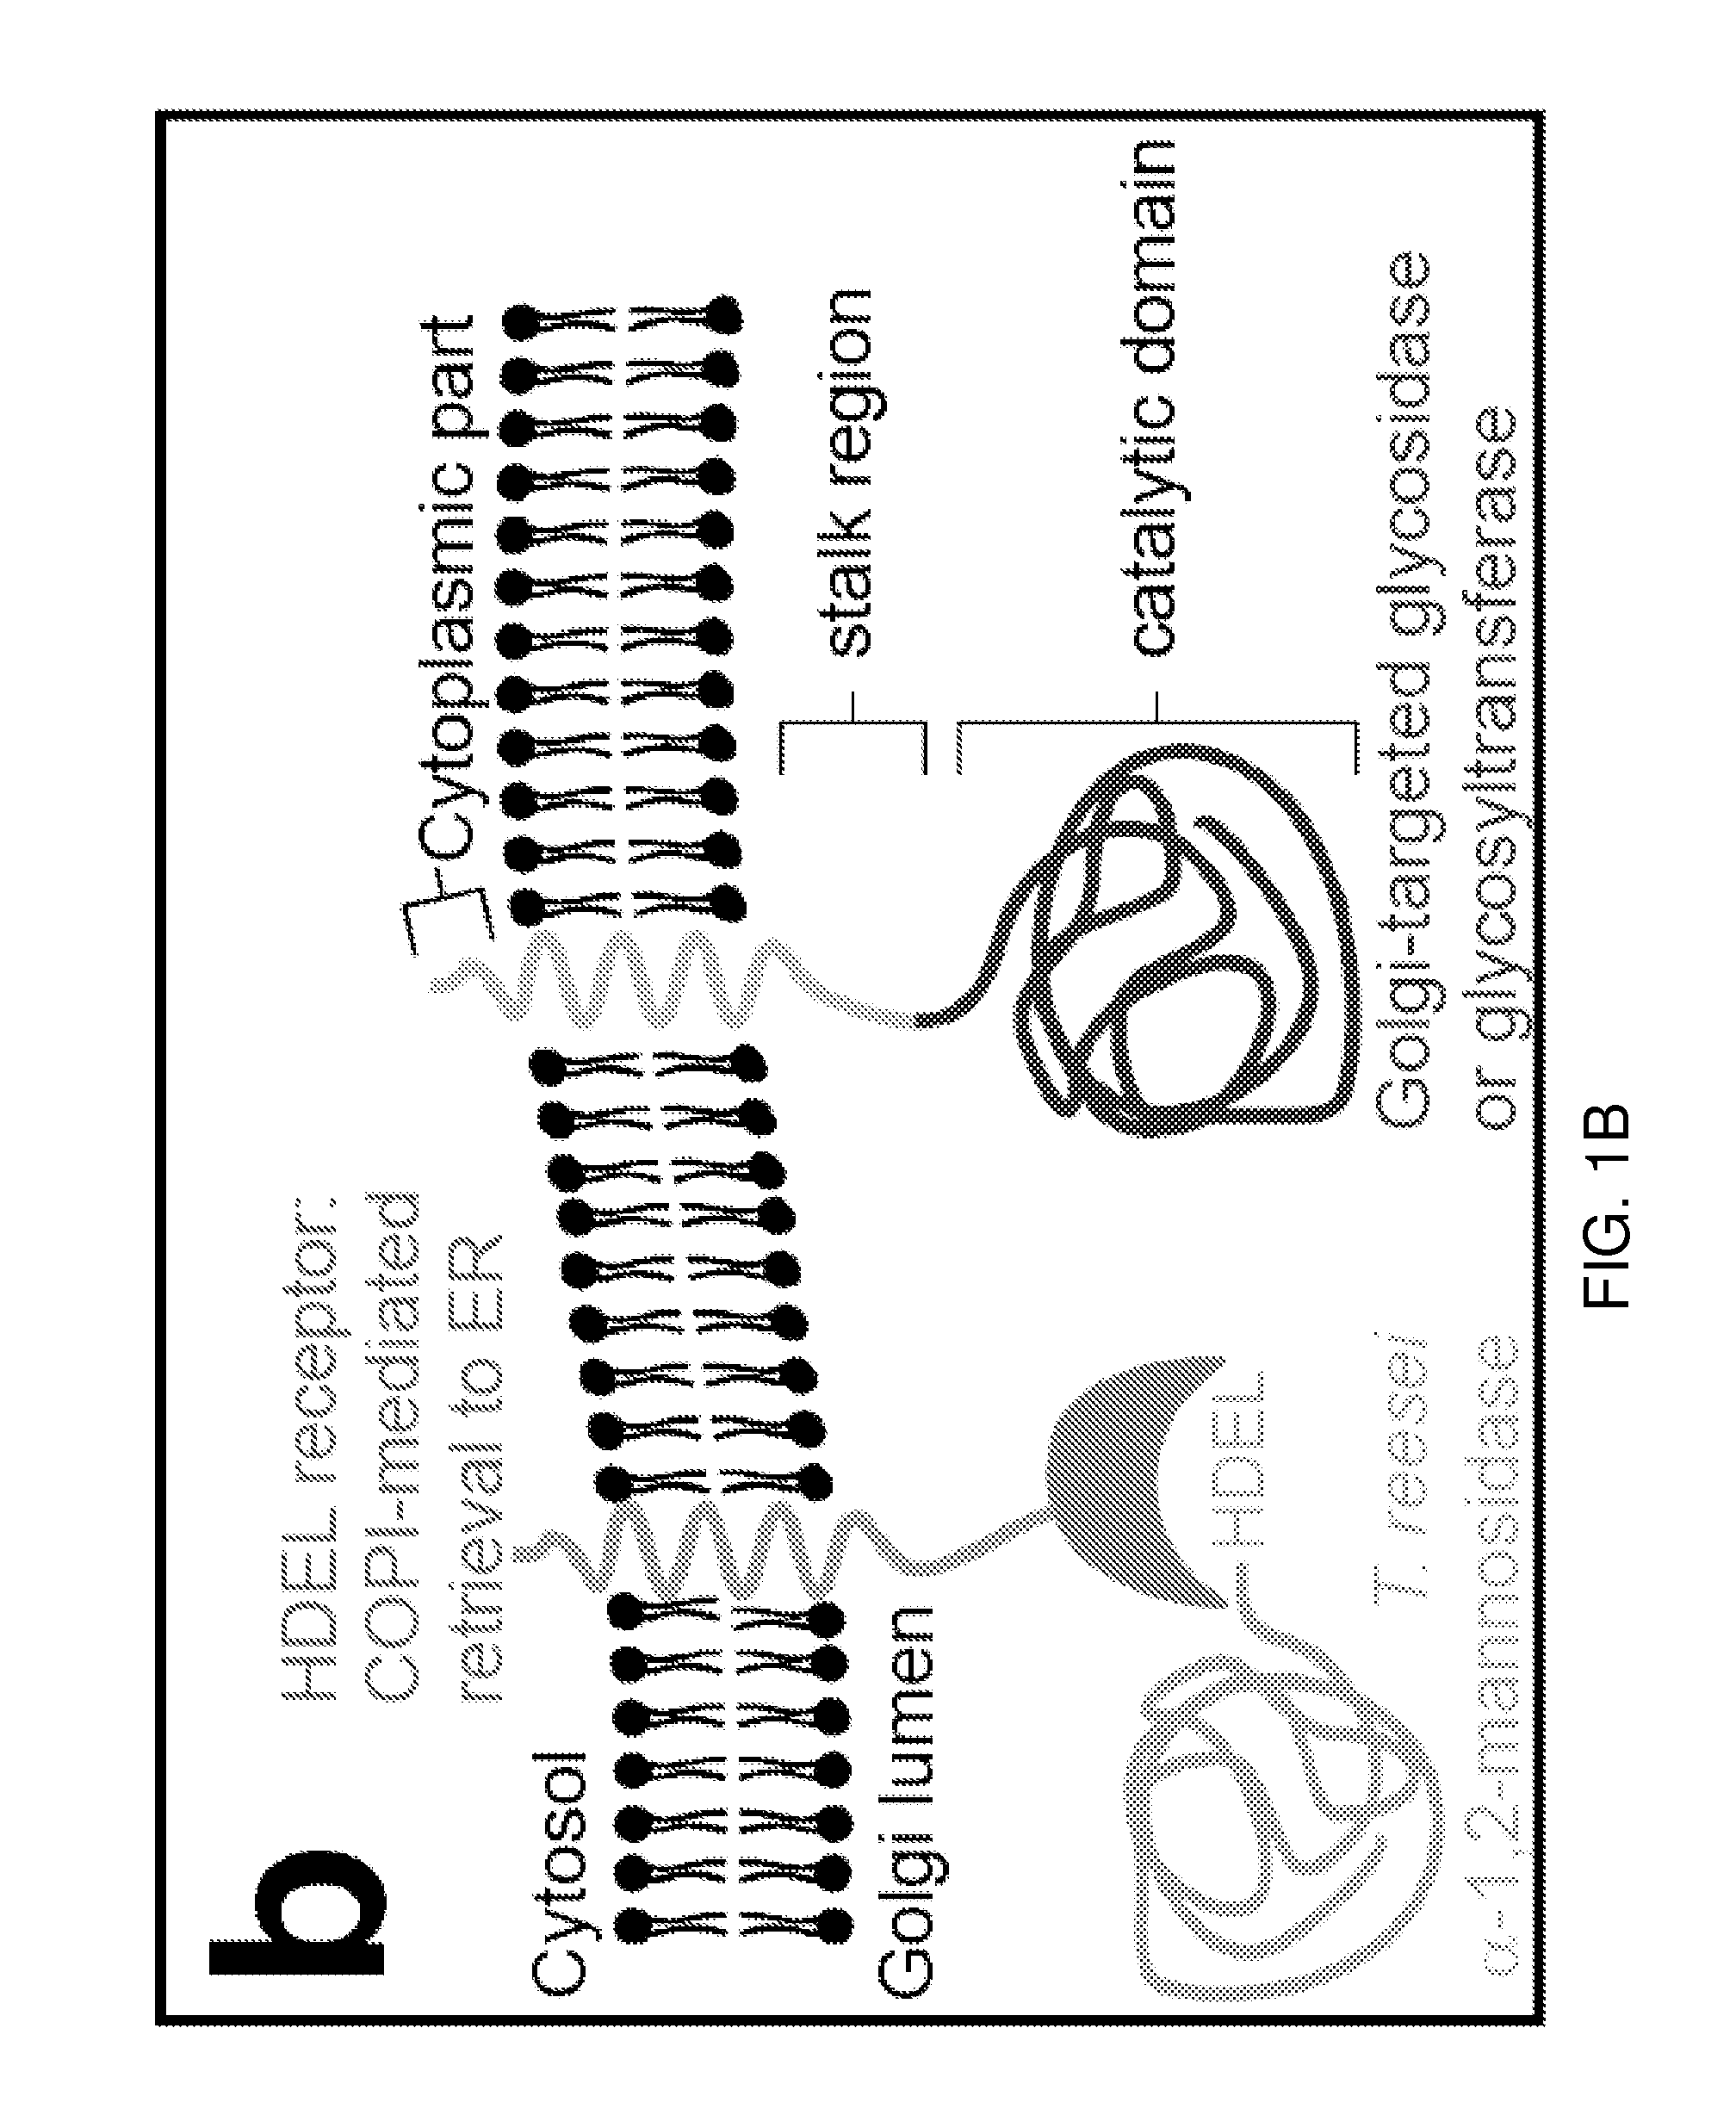 Methods for producing substantially homogeneous hybrid or complex n-glycans in methylotrophic yeasts